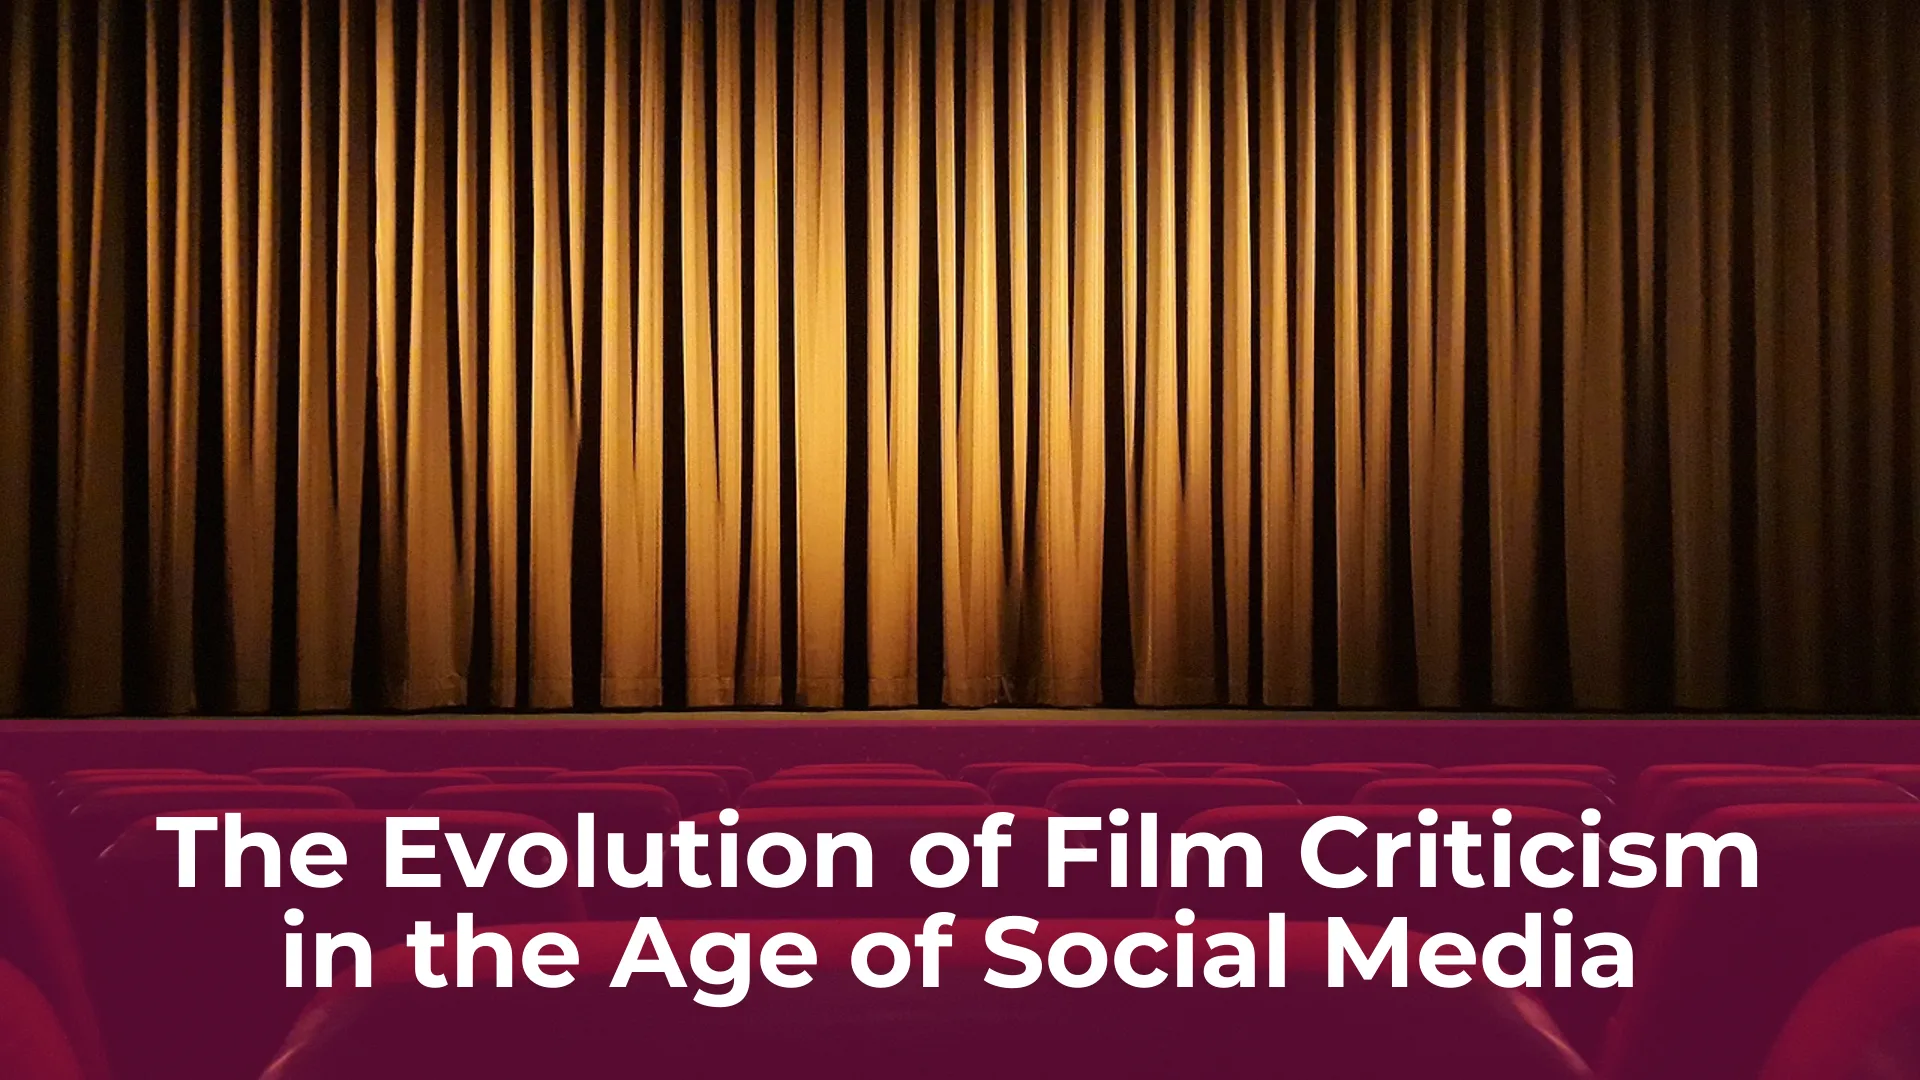 The evolution of film criticism in the age of social media